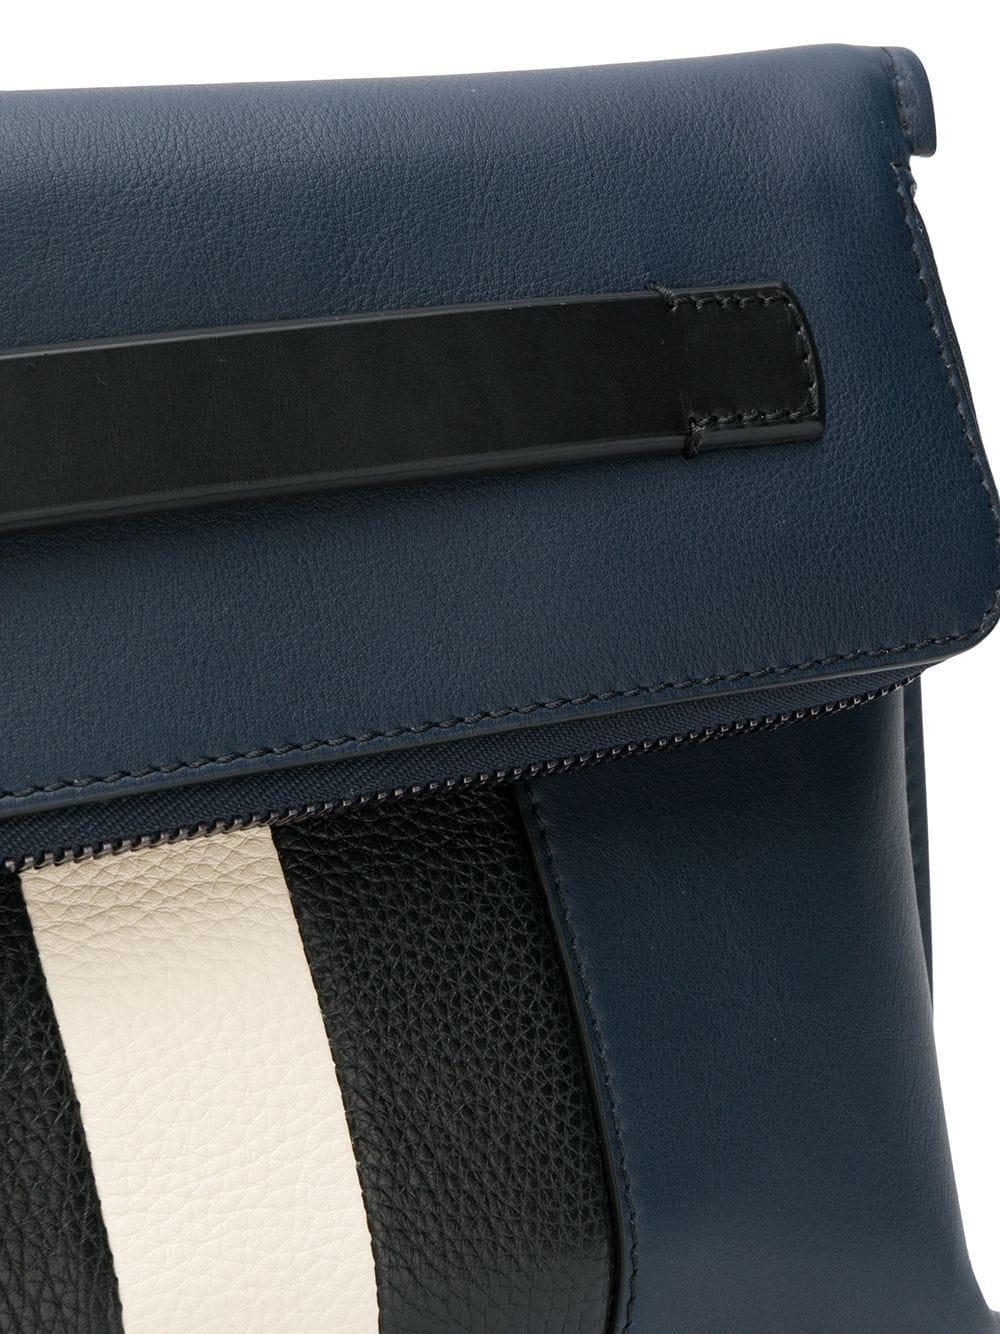 Bally Leather Striped Clutch Bag in Blue for Men - Lyst